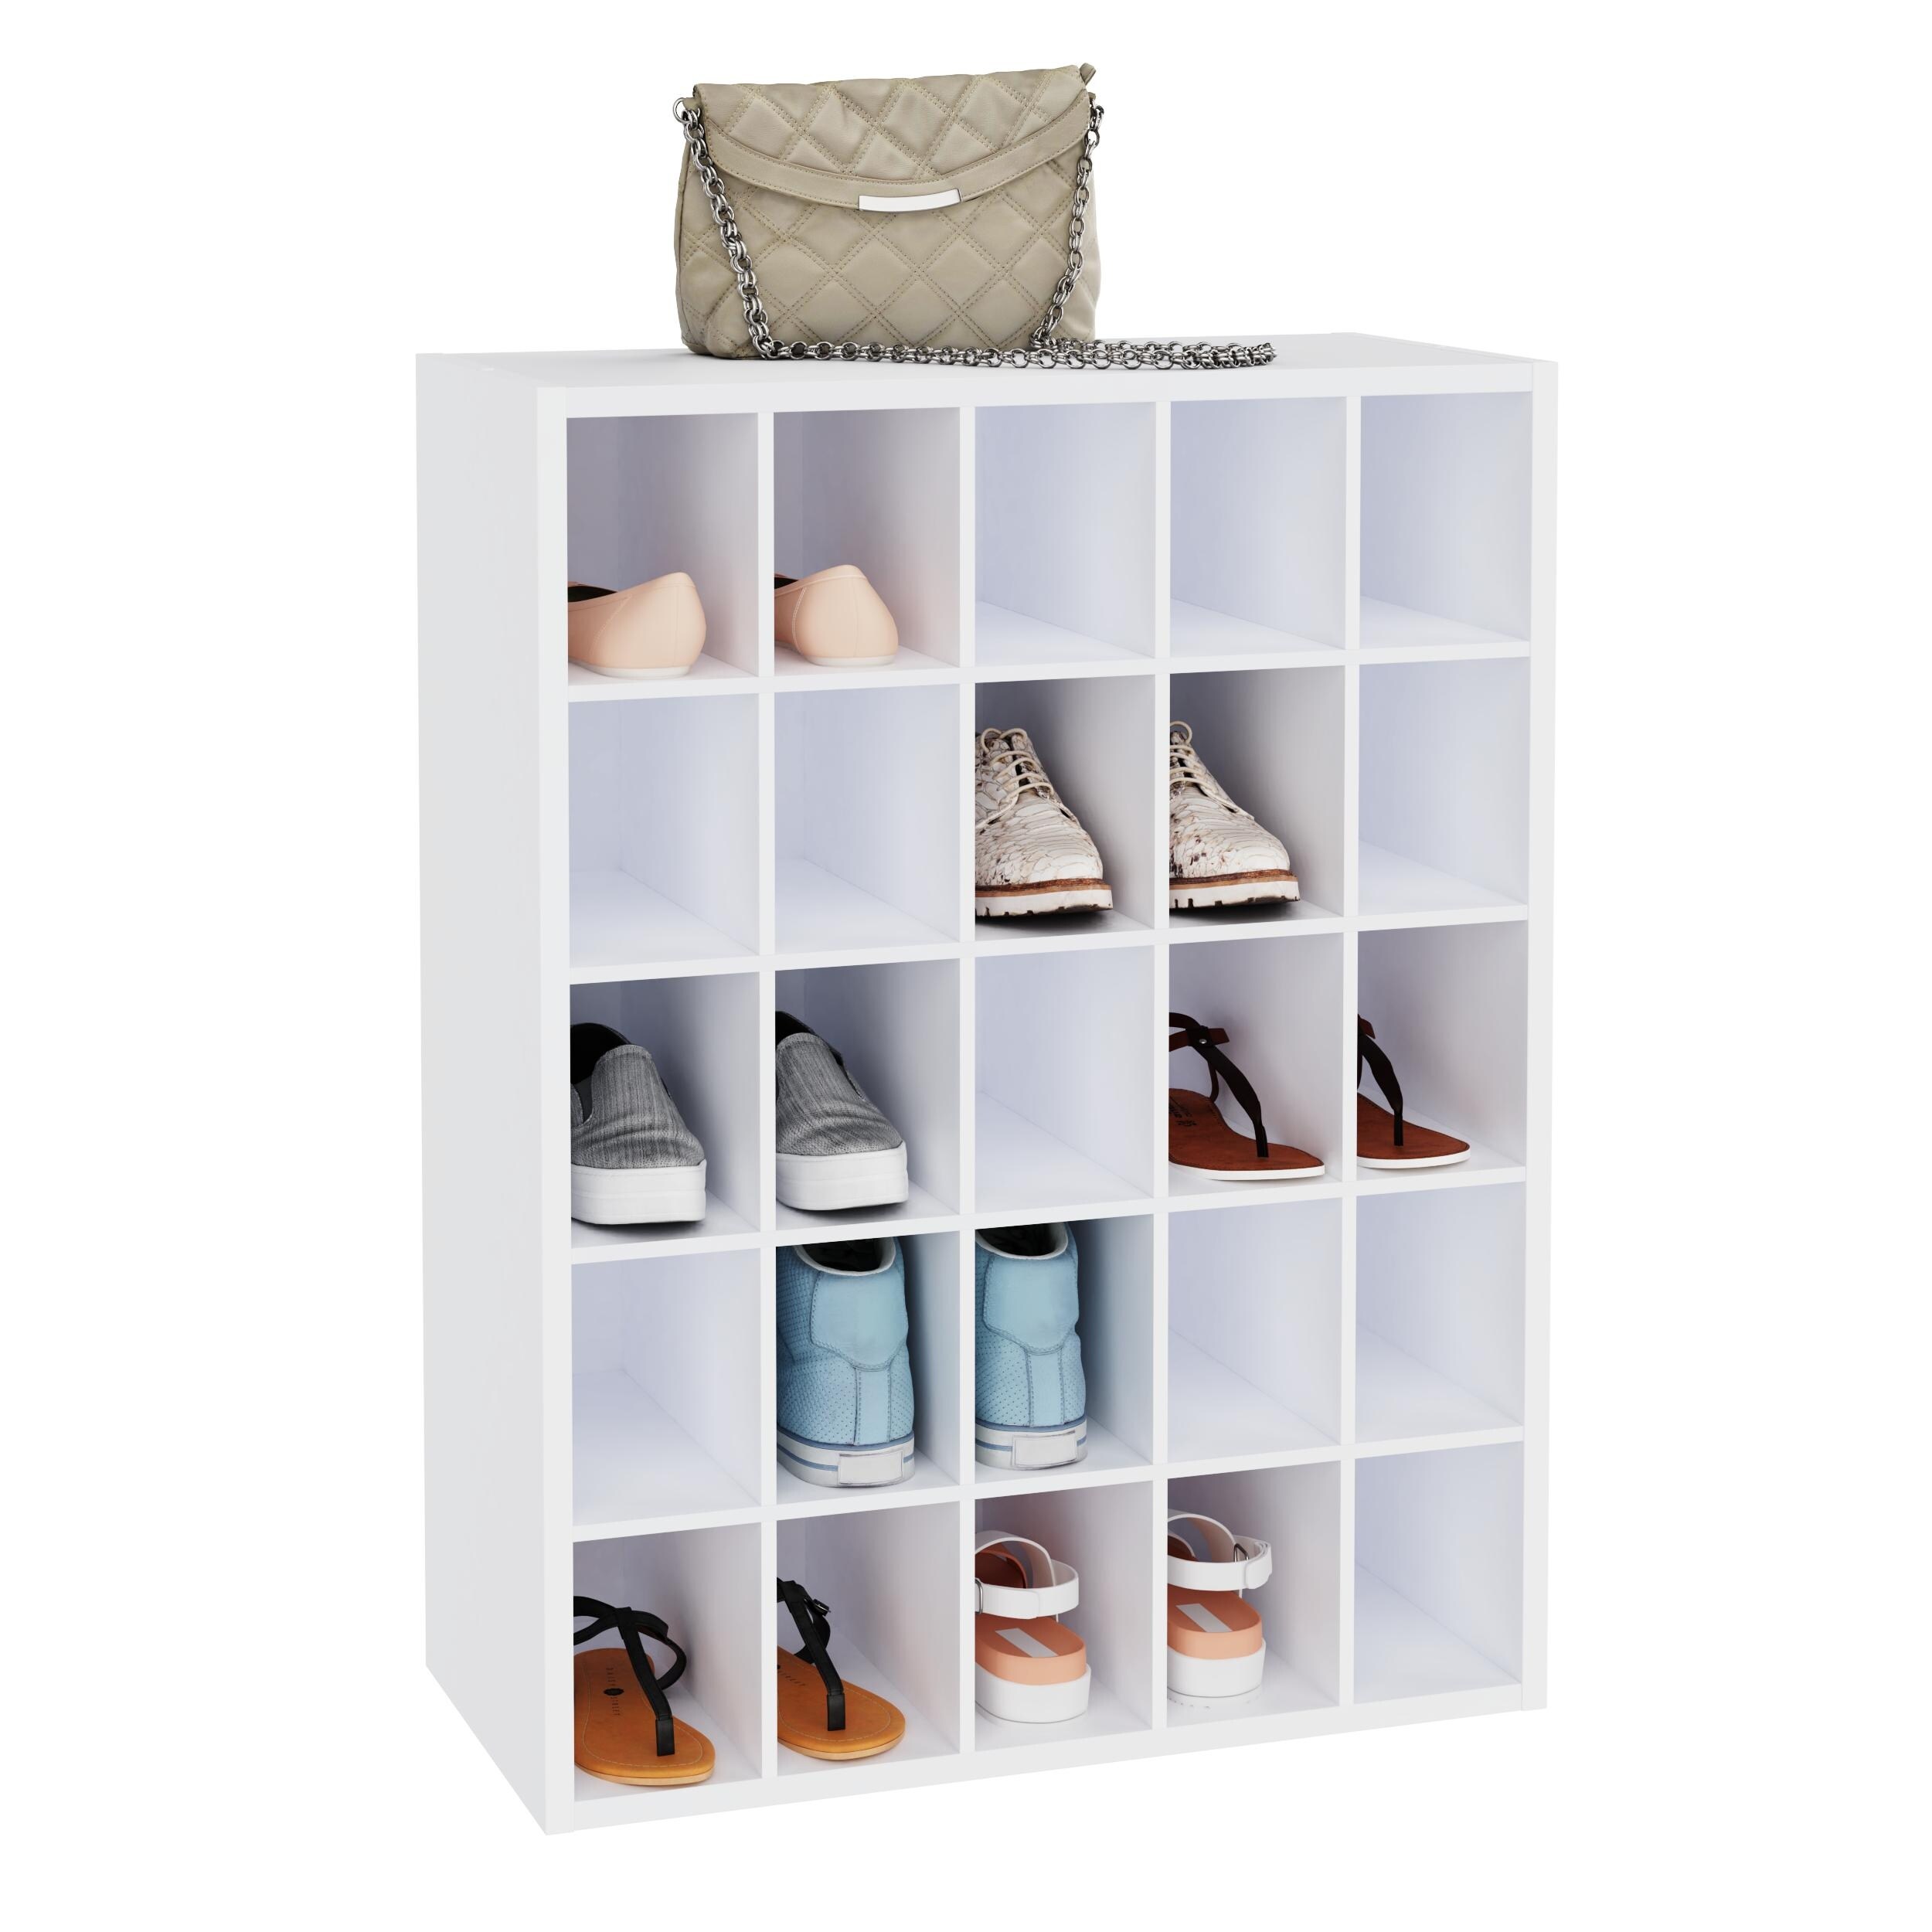 https://ak1.ostkcdn.com/images/products/is/images/direct/a776205f4d3bf3459a06c969e5ebc6f393c5b5b3/ClosetMaid-25-Shoe-Cube-Organizer.jpg